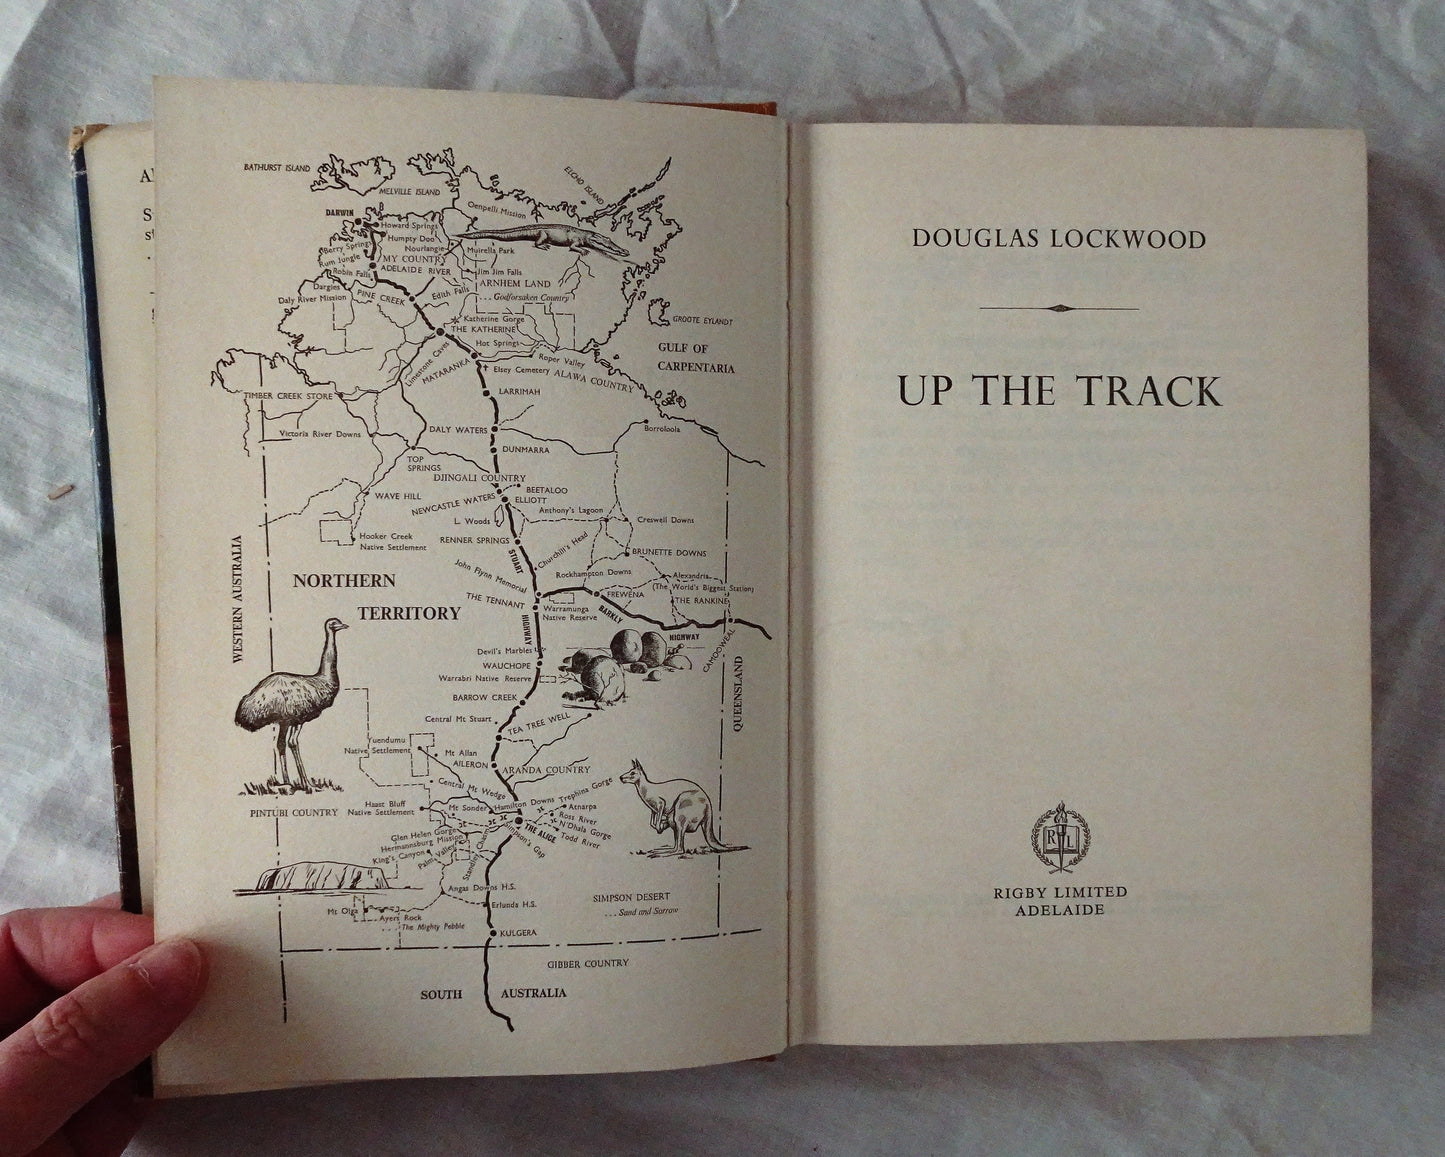 Up The Track by Douglas Lockwood